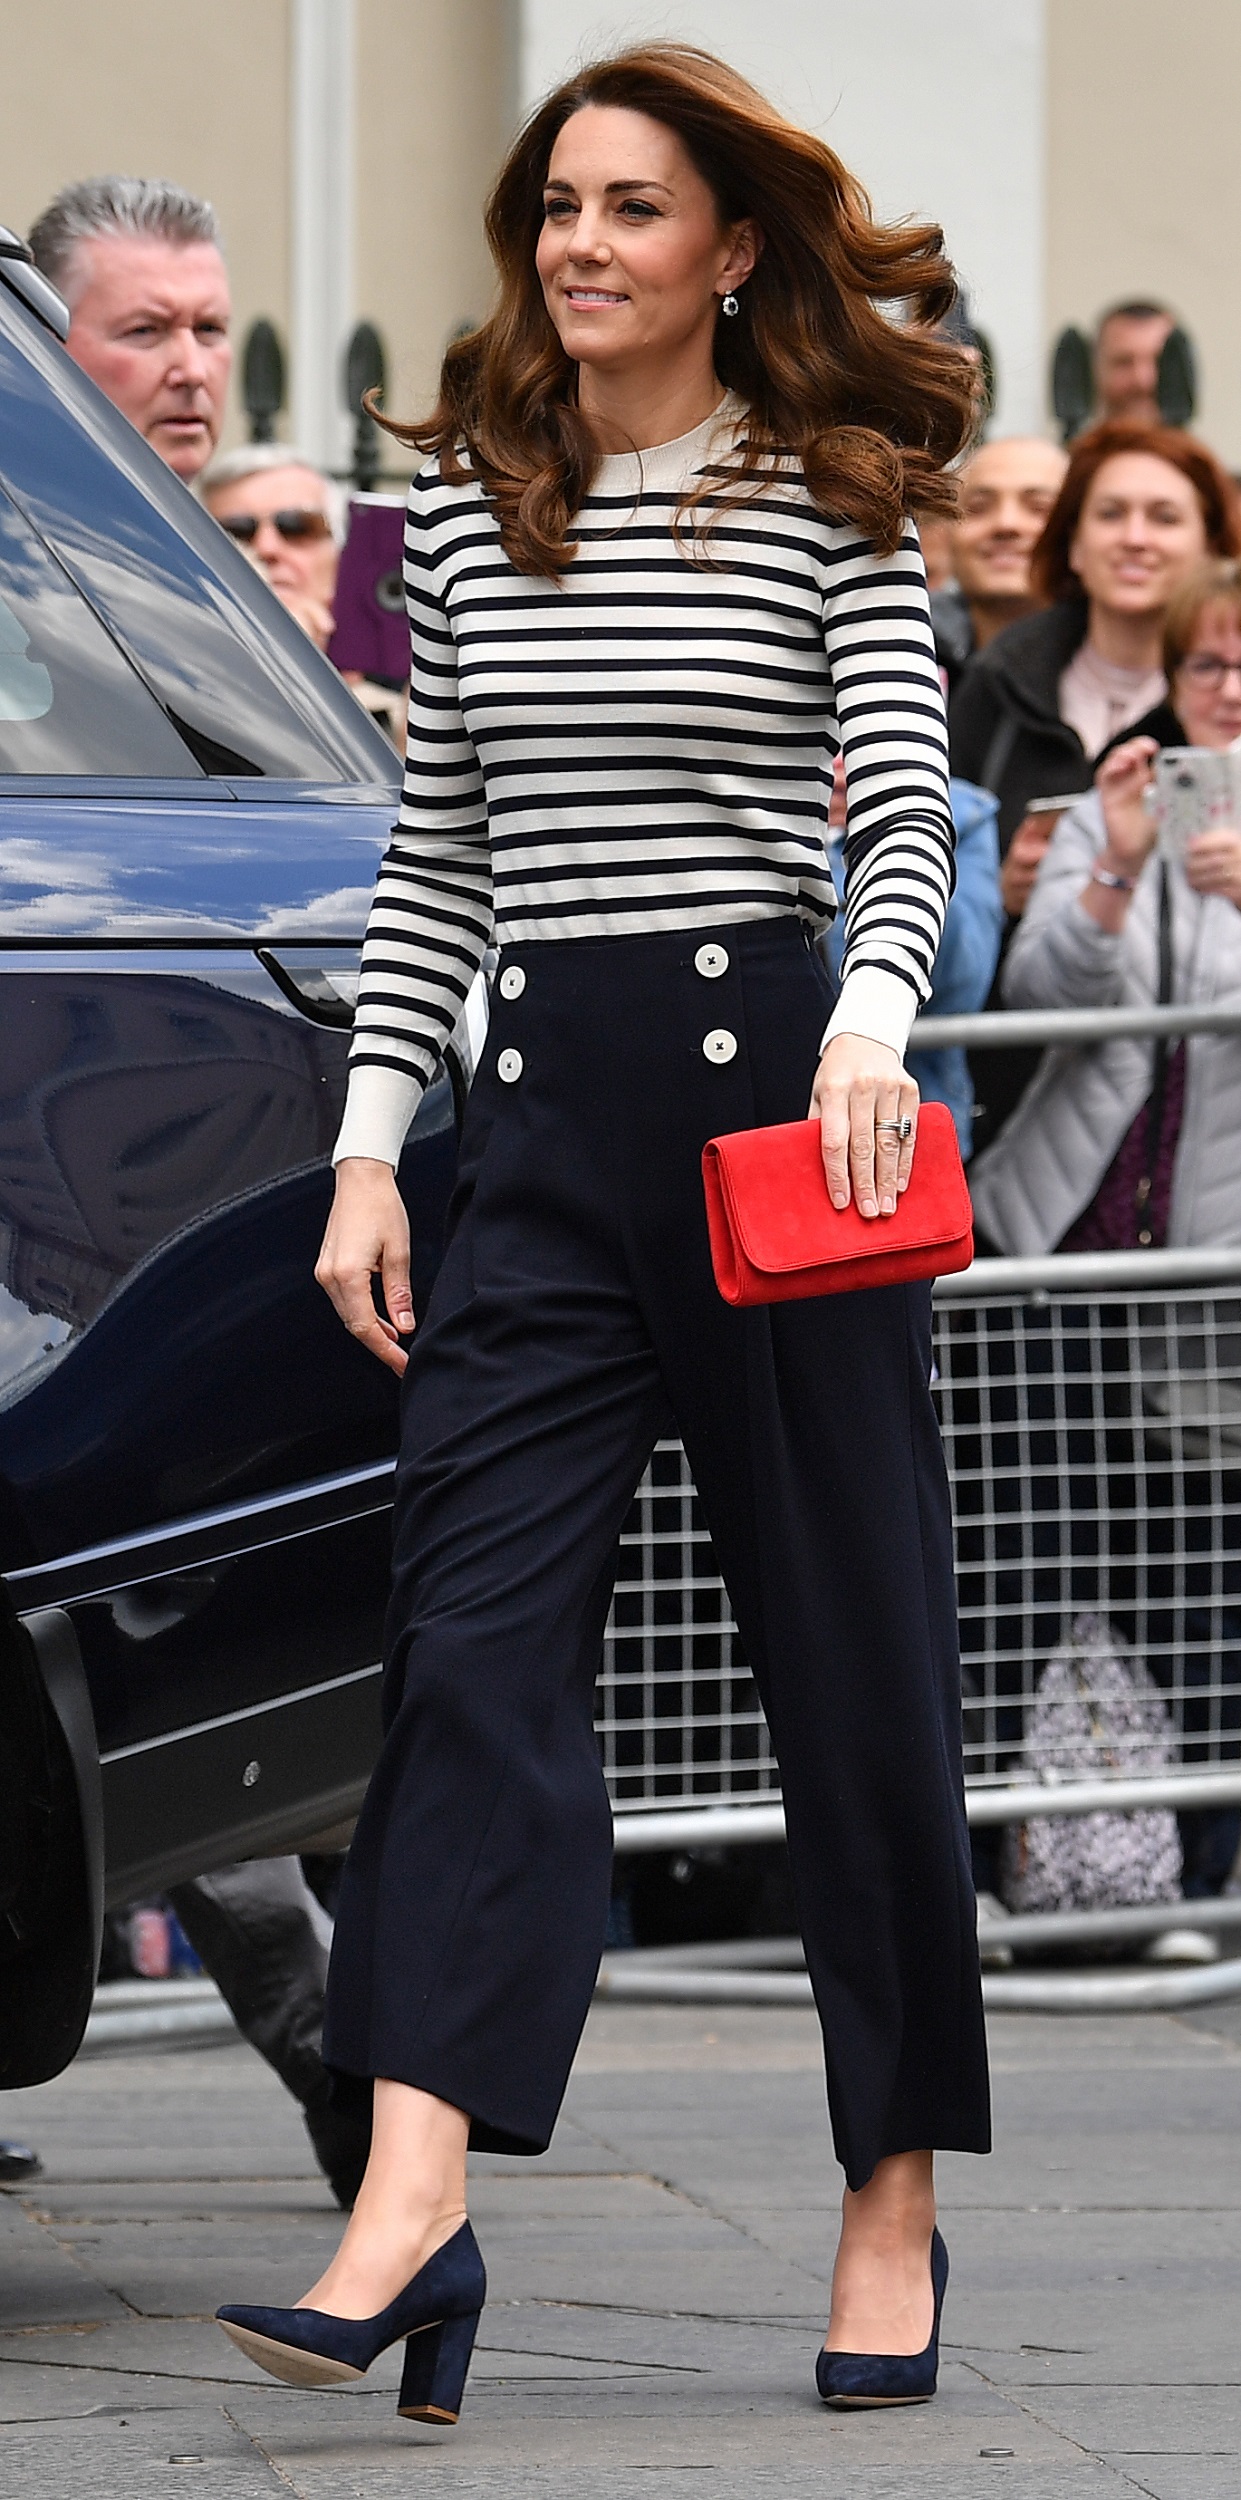 LONDON, ENGLAND - MAY 07: Catherine, Duchess of Cambridge arrives to launch the King's Cup Regatta during the launch of the King's Cup Regatta at Cutty Sark, Greenwich on May 7, 2019 in London, England. (Photo by Ben Stansall - WPA Pool / Getty Images)